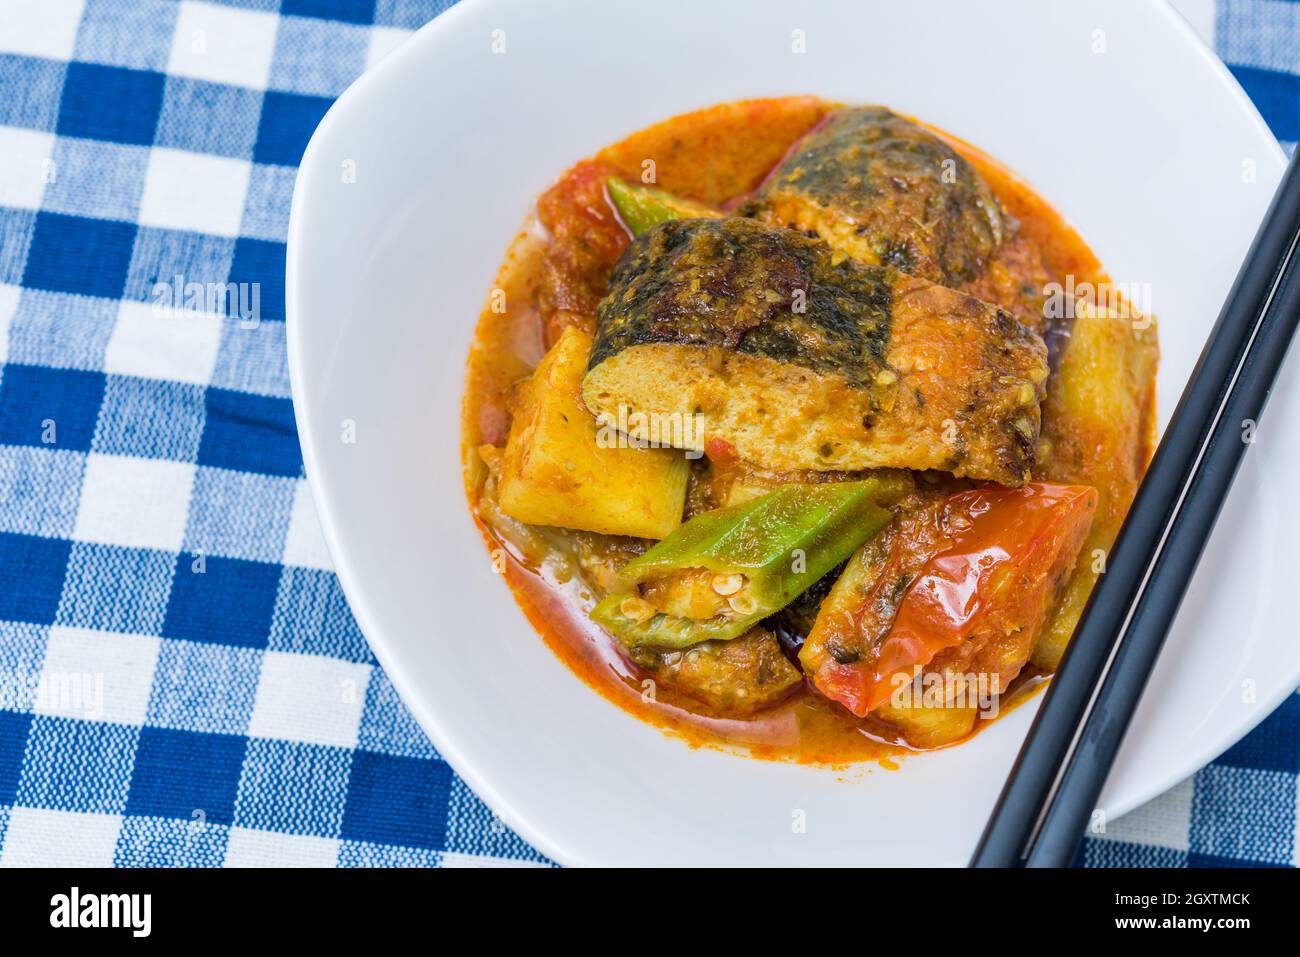 Delicious vegetarian spicy curry fish head dish on blue table cloth. Stock Photo